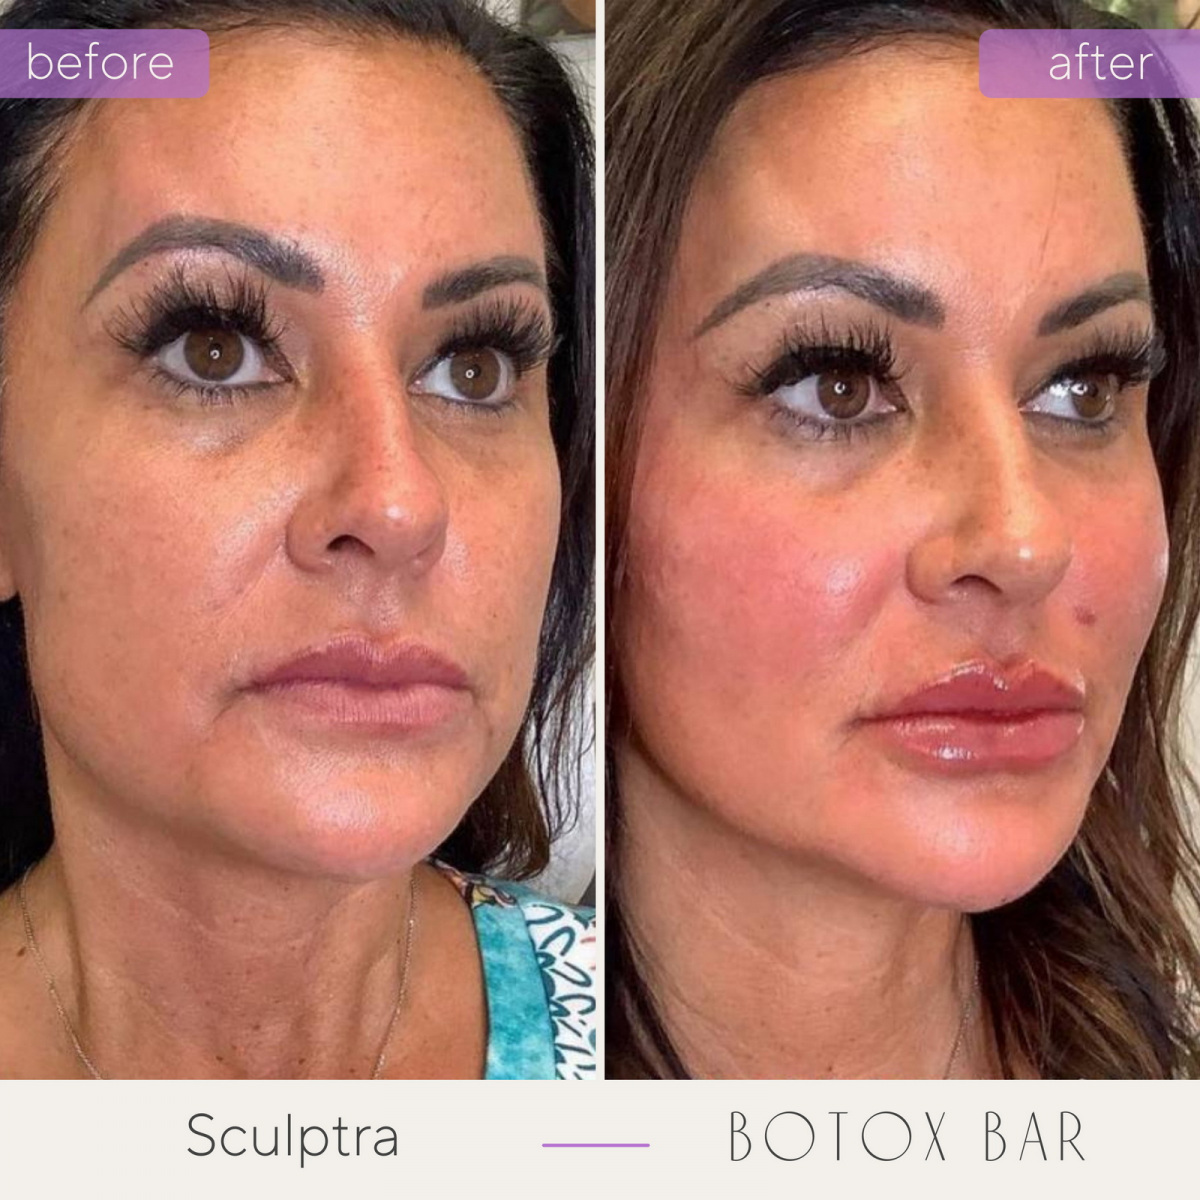 Before and After Sculptra treatment in The Botox Bar and Aesthetics at Dallas & Sherman, TX